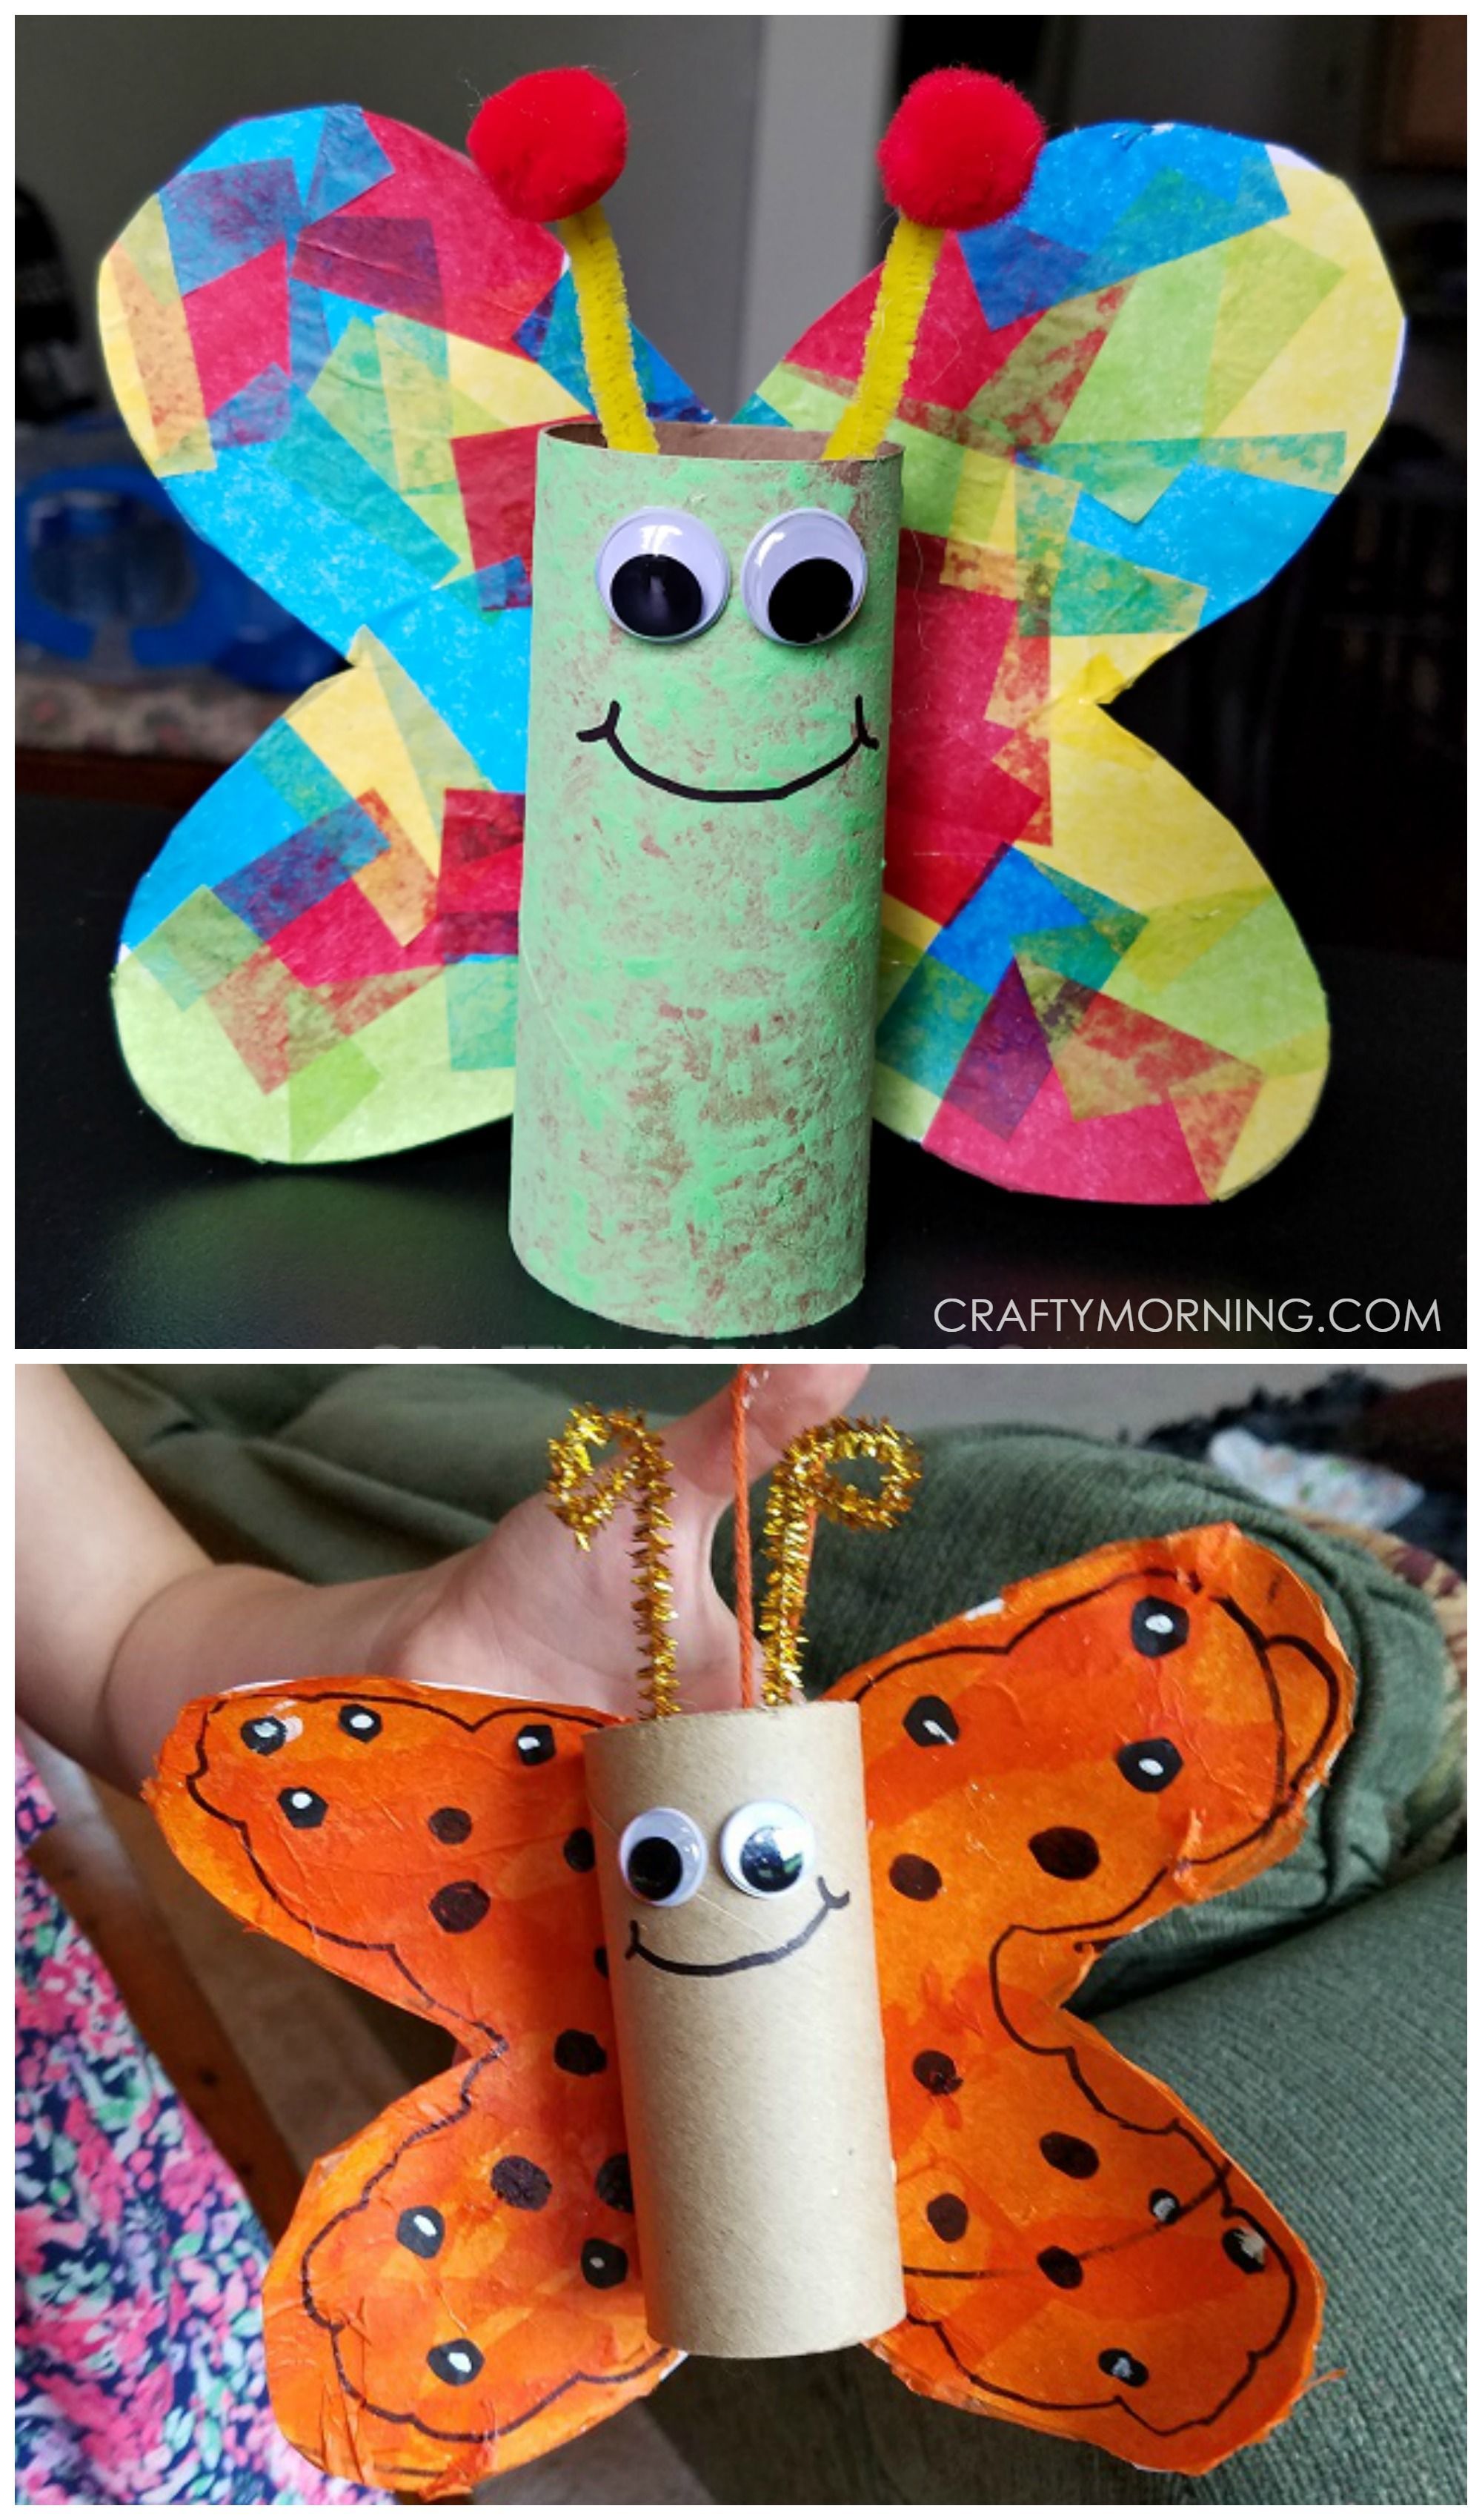 Cardboard tube butterfly craft for kids to make! Perfect for spring or summer. Use toilet paper rolls or paper towel rolls.